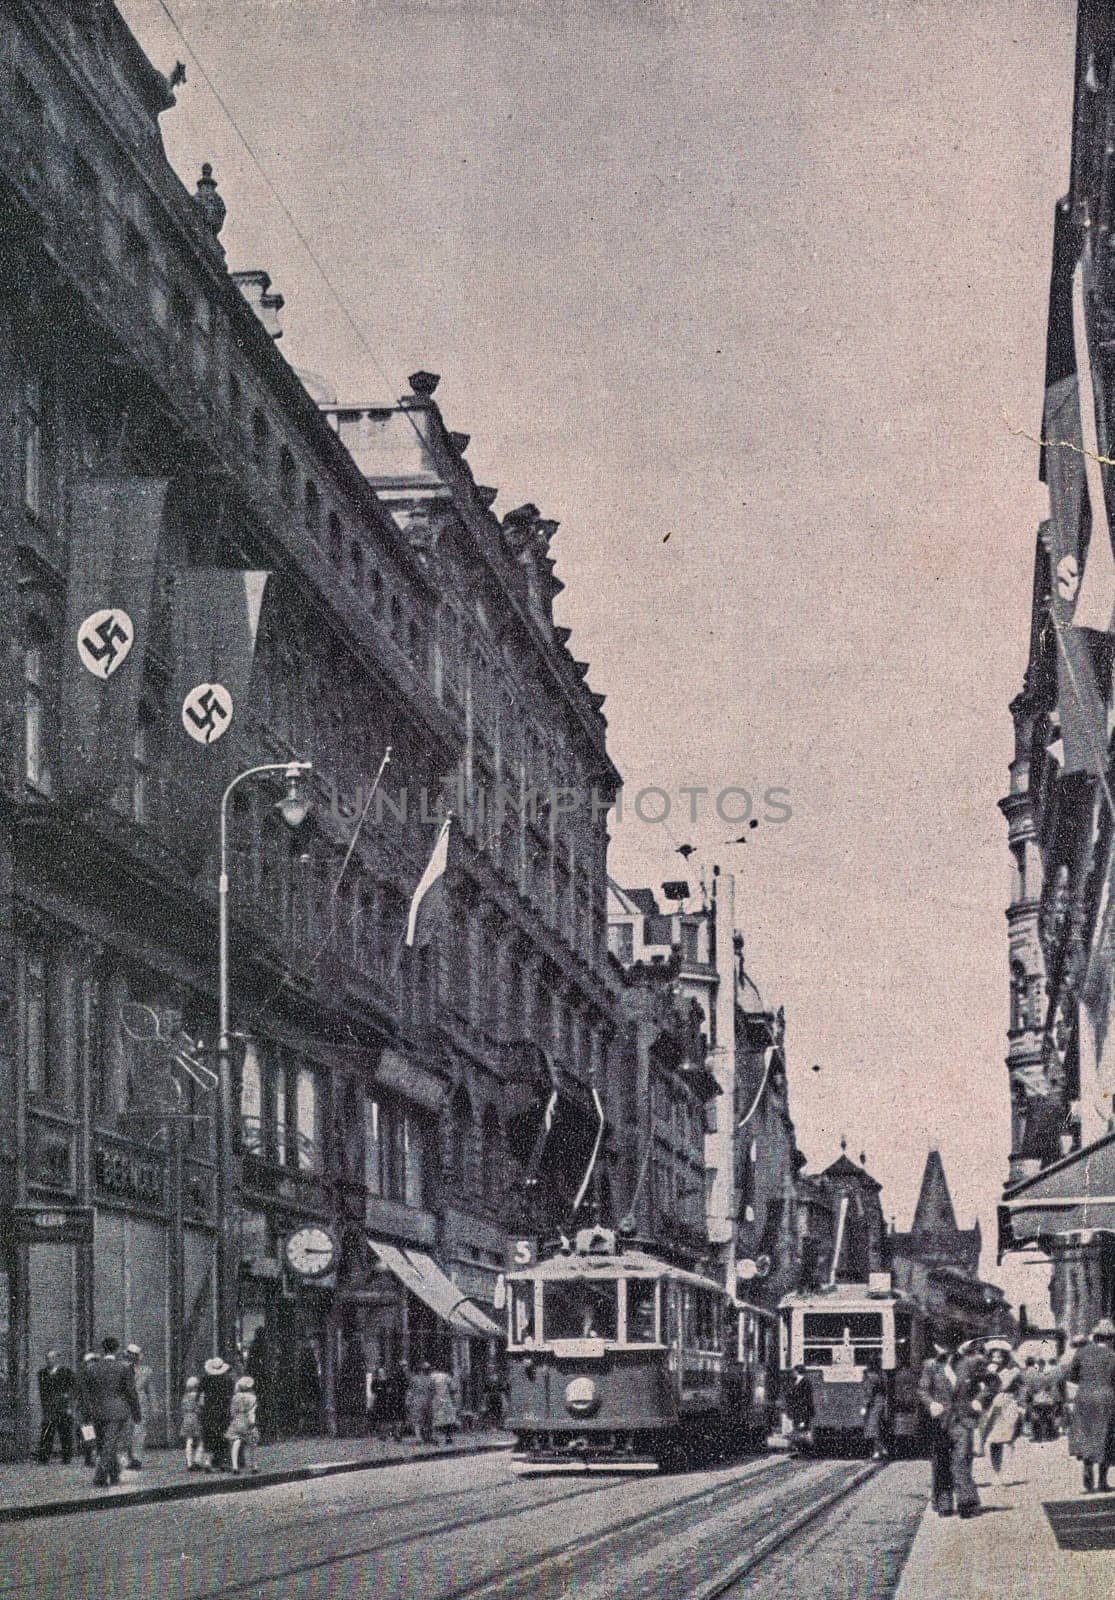 Unkown street in Prague. Nazi Swastika flags on building. by roman_nerud